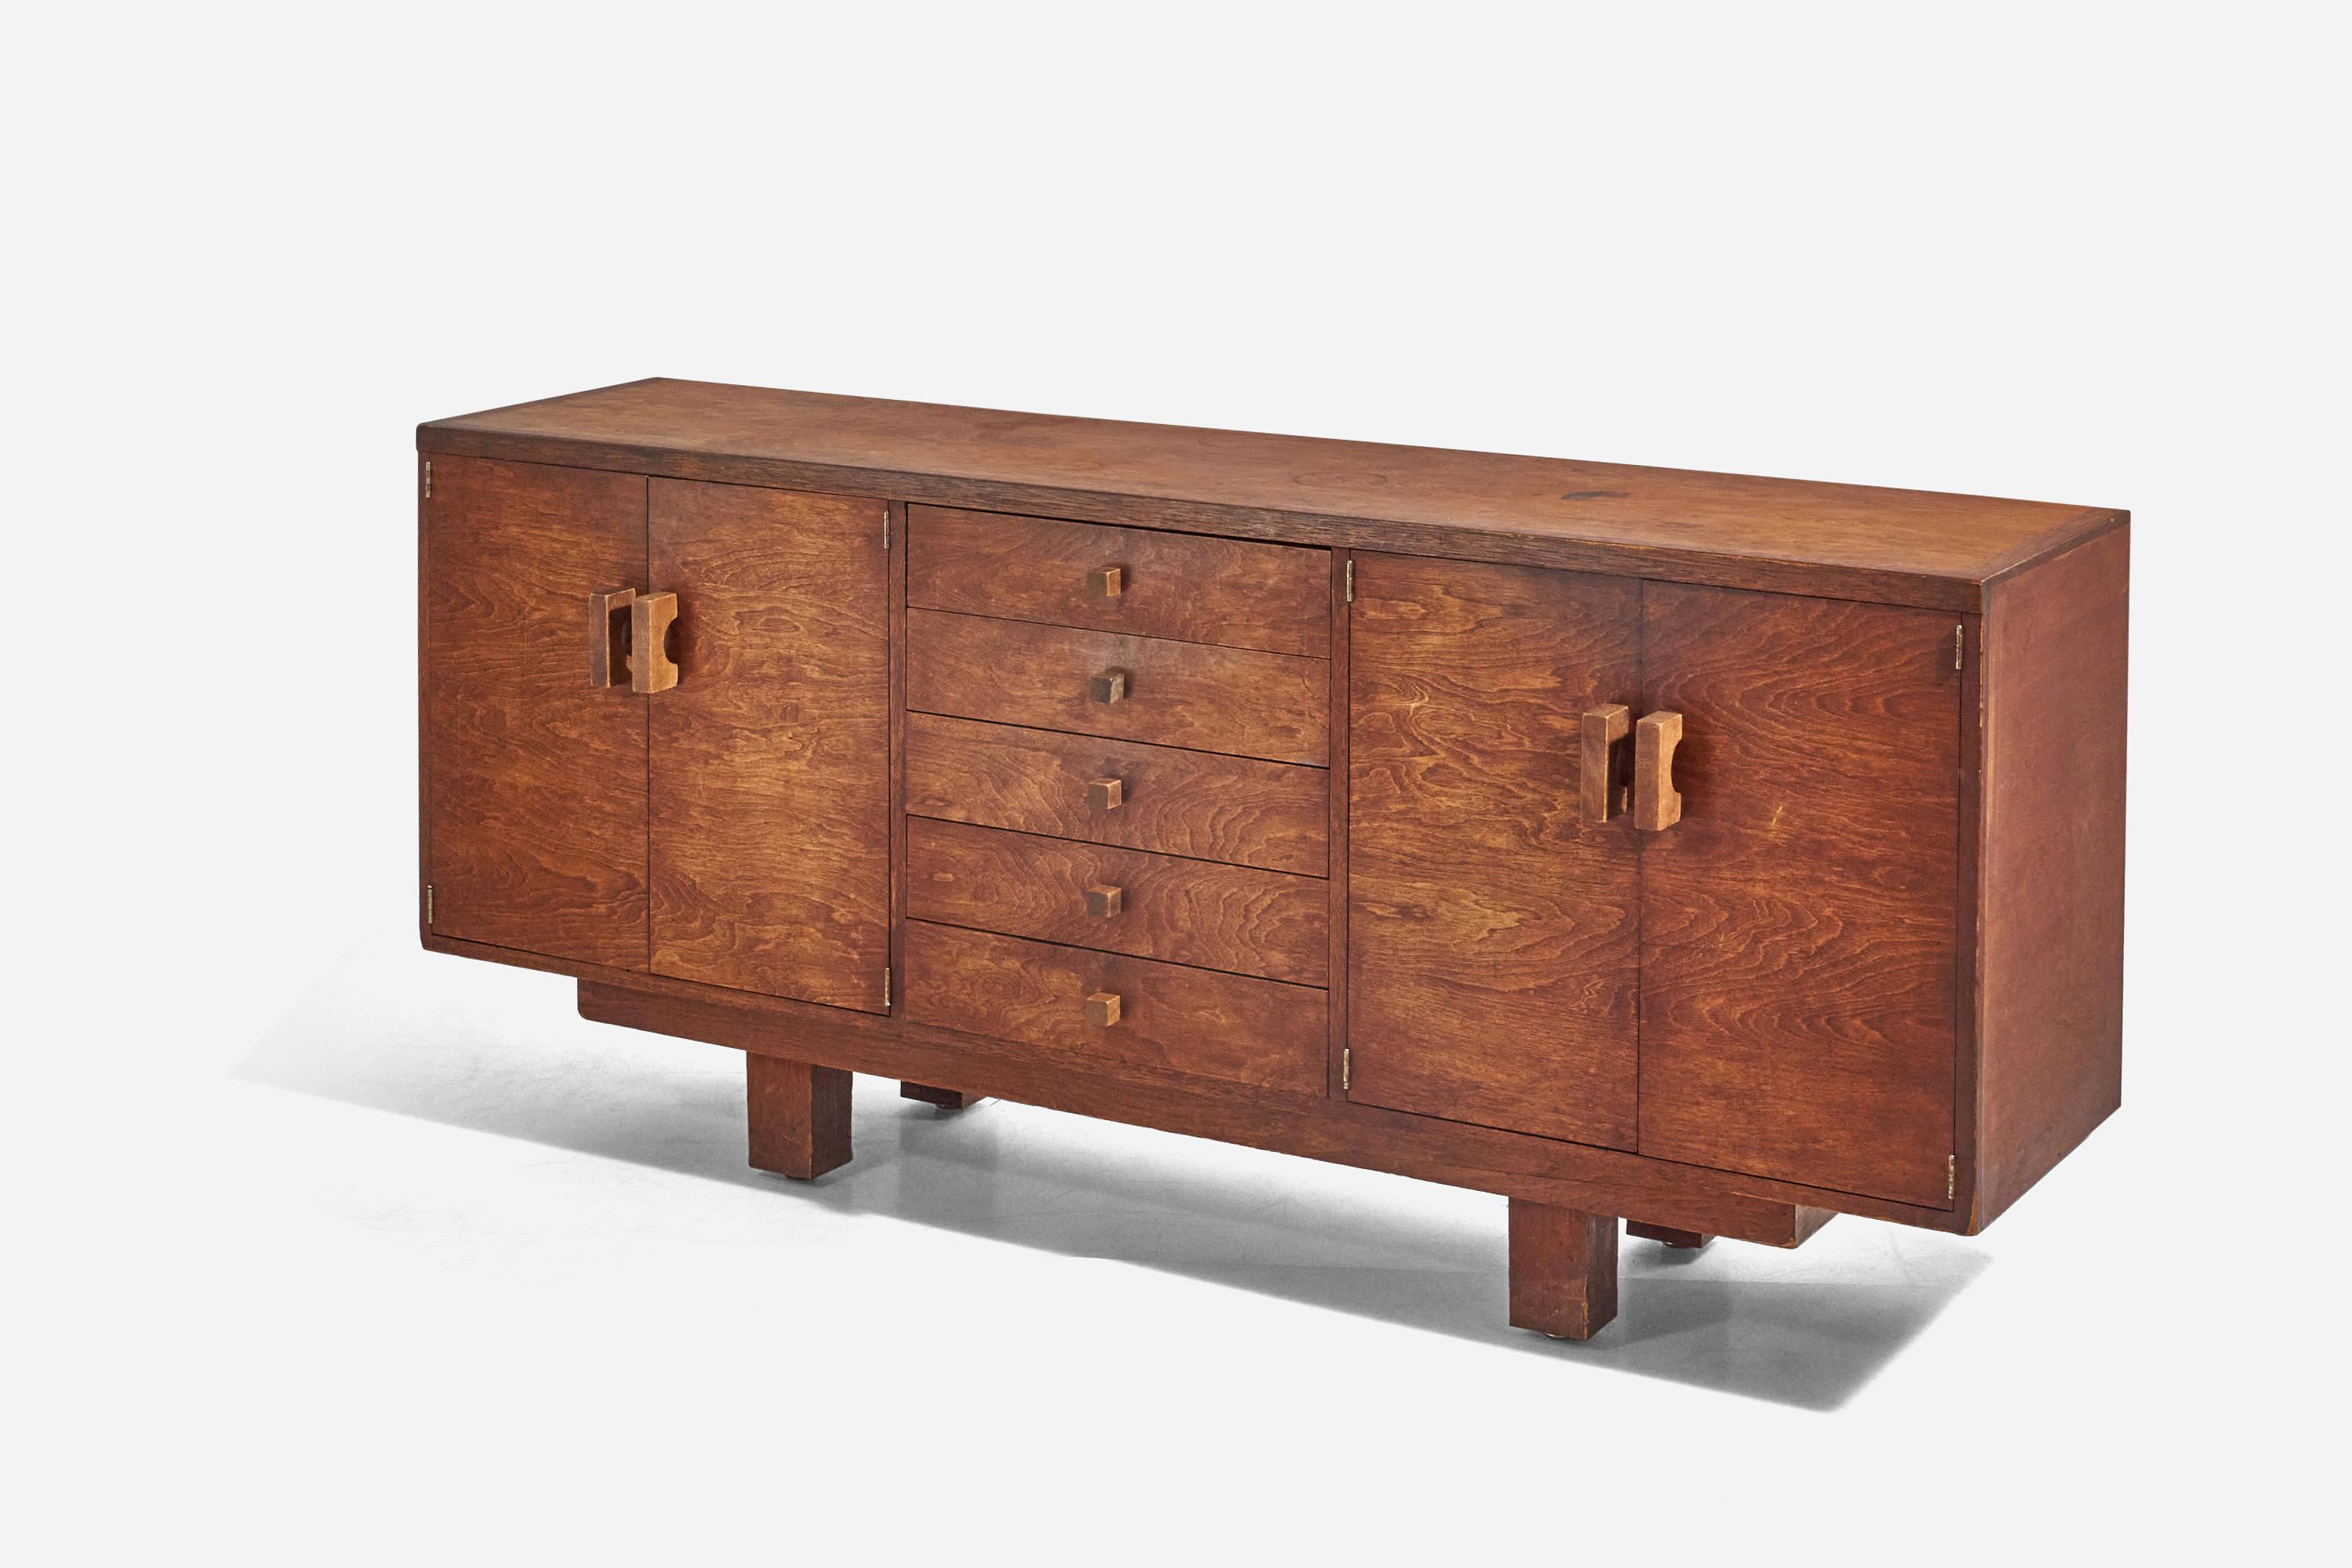 A oak cabinet / dresser designed and produced in the United States, 1960s.